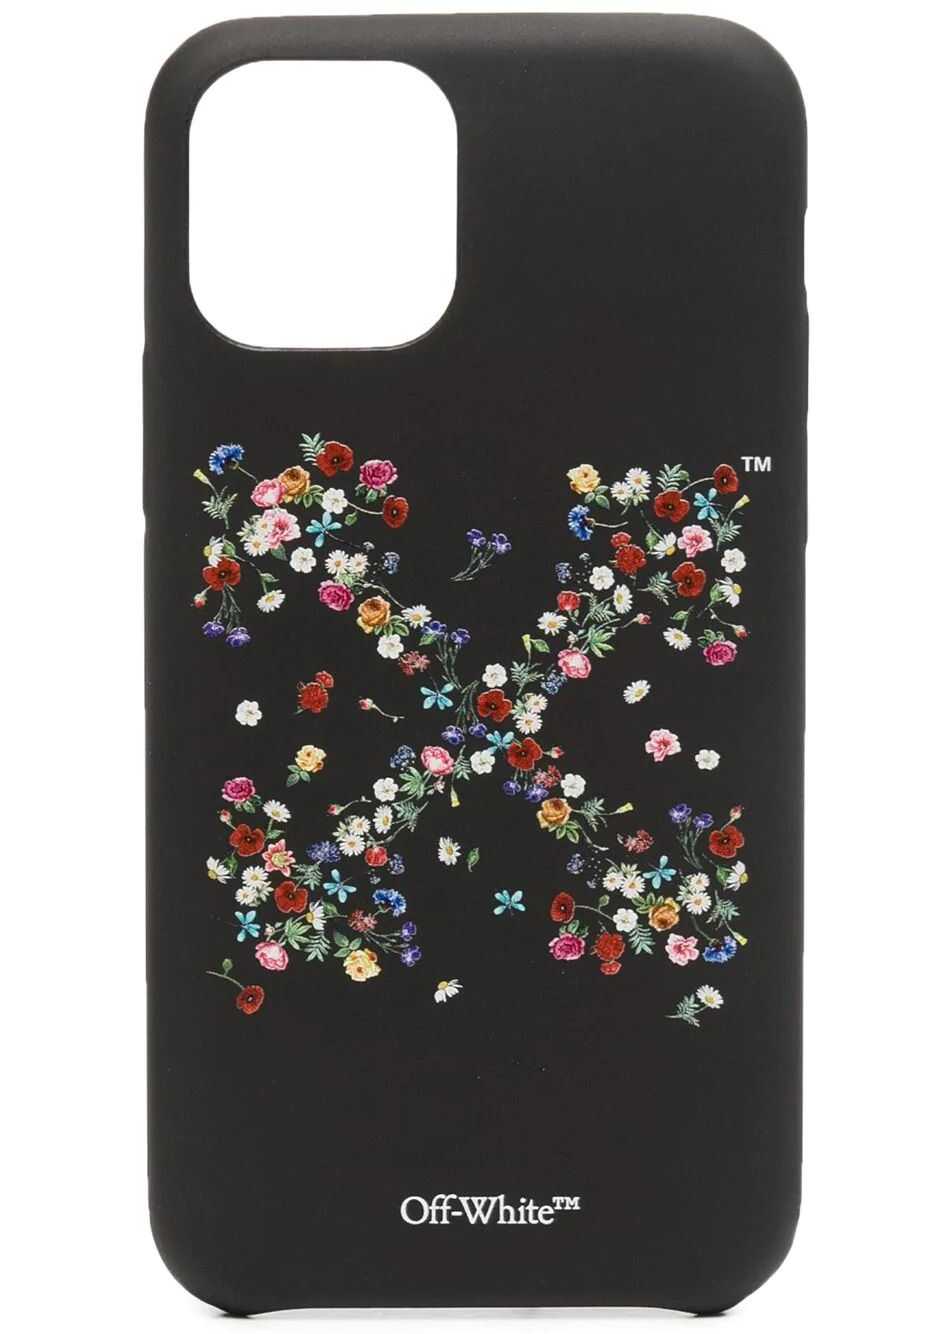 Off-White Floral Printed Carryover 11Pro Iphone Case Black image7